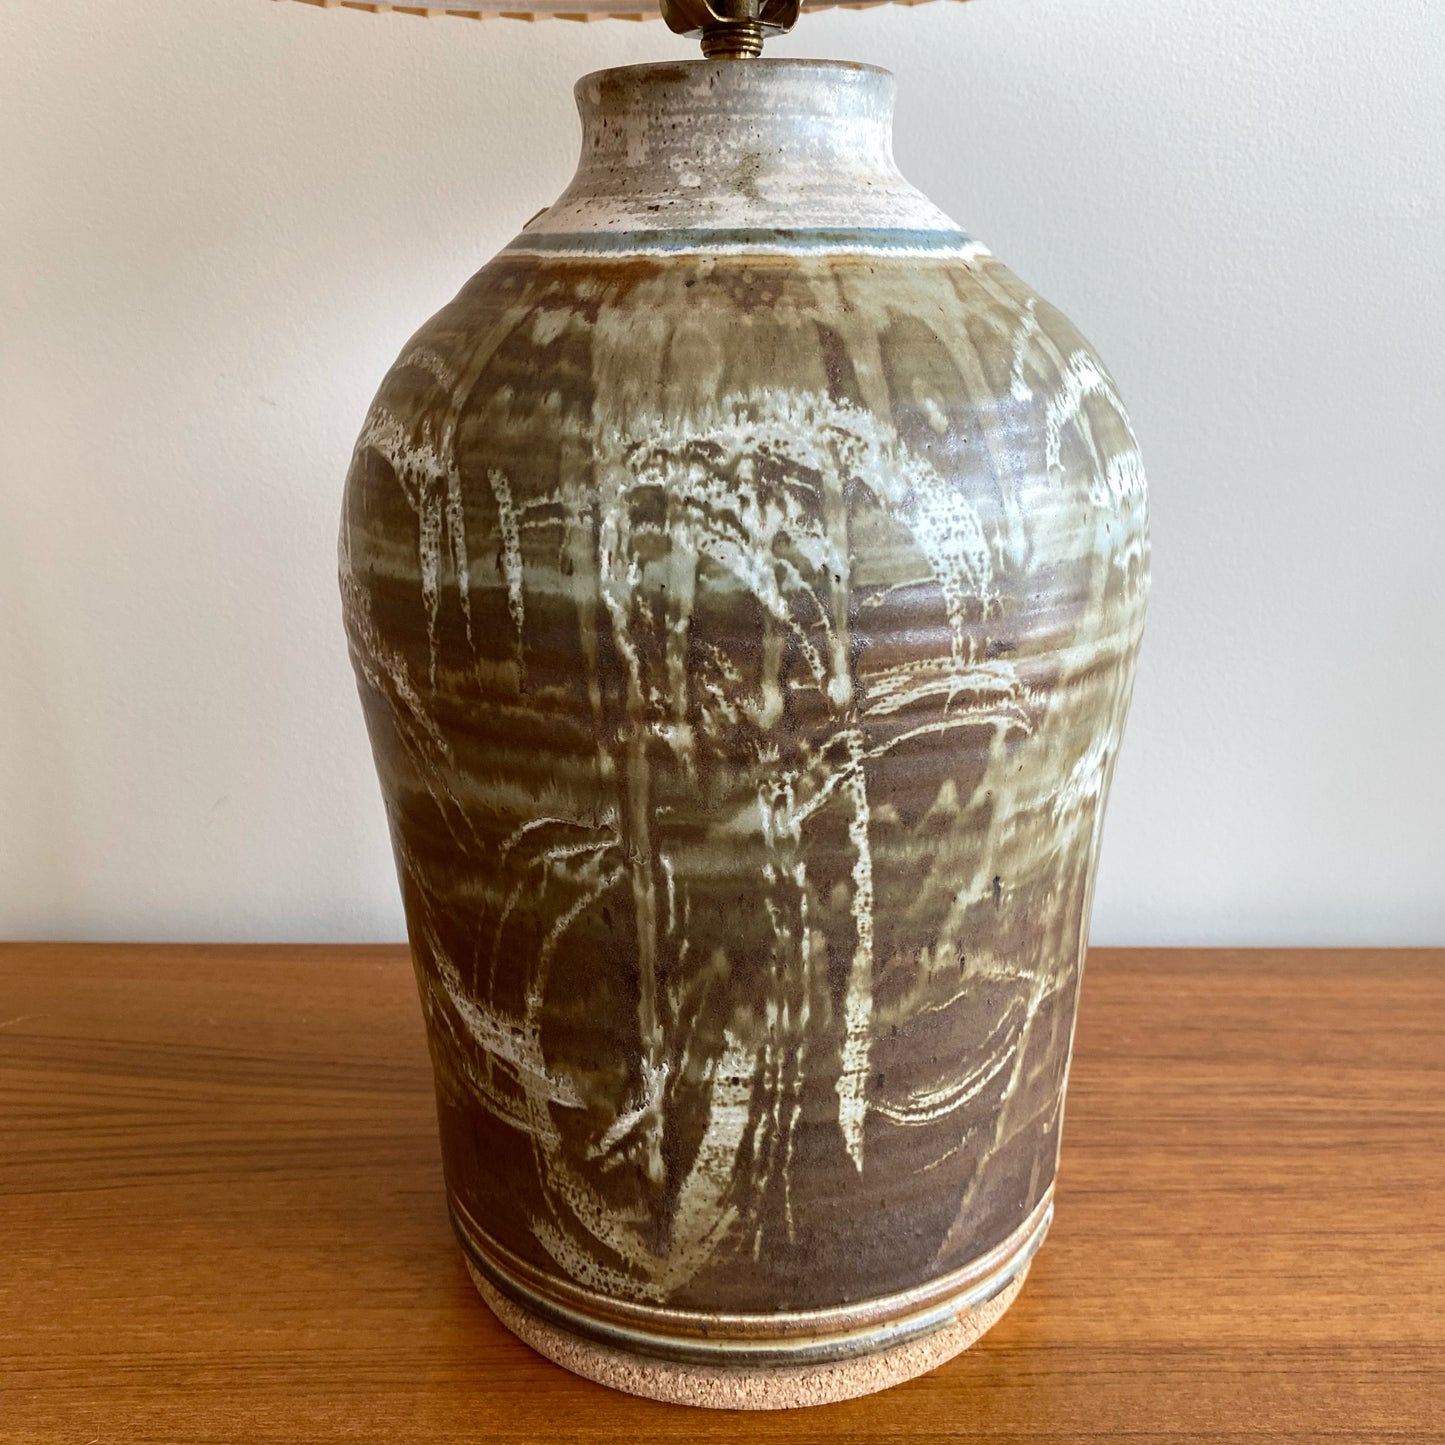 Vintage Studio Pottery Lamp with Pleated Shade